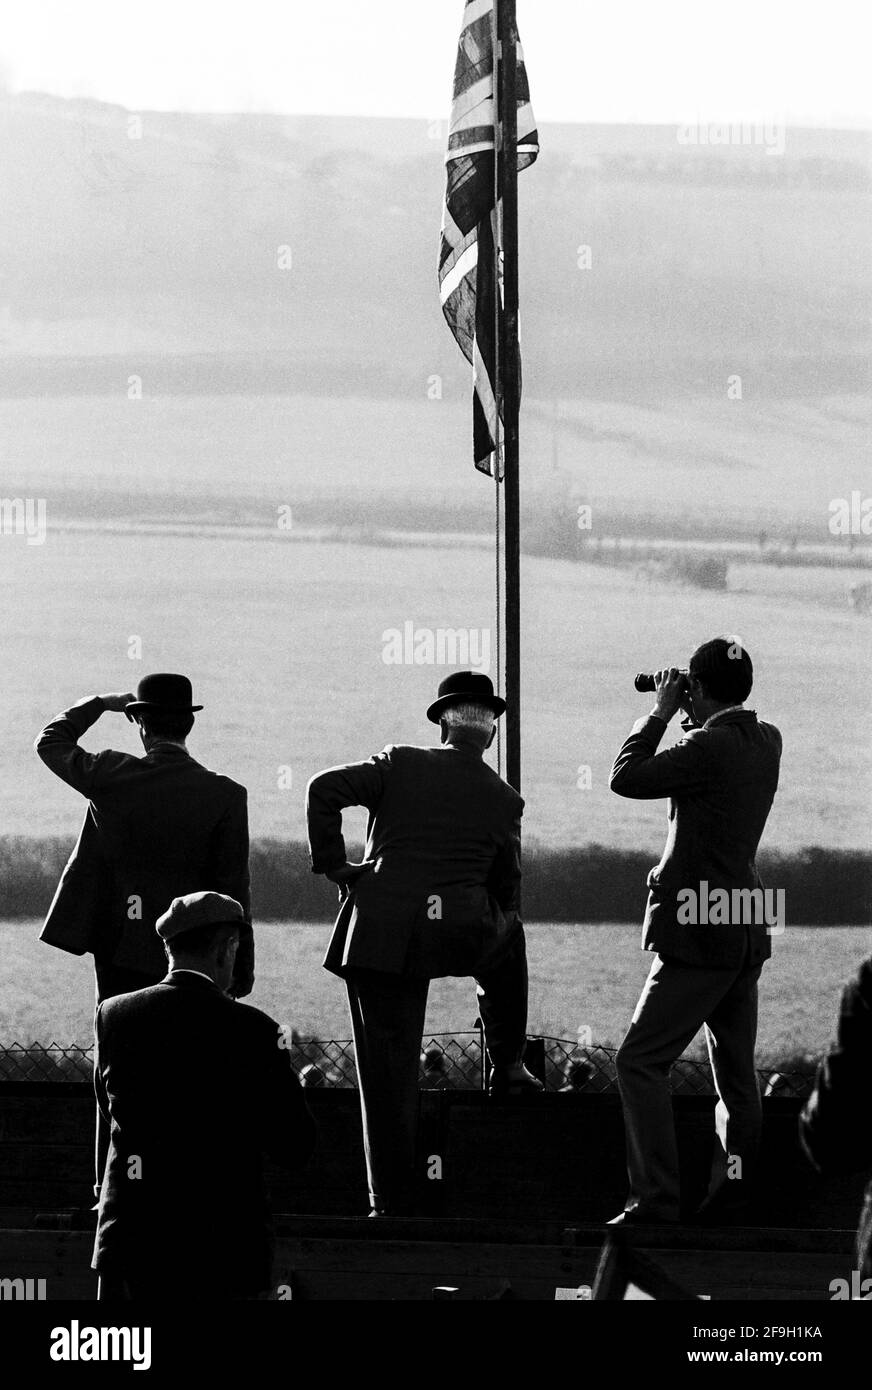 UK, England, Devonshire, Buckfastleigh, 1972. Point-to-Point races were held at  Dean Court on the Dean Marshes, close to the A38 between Plymouth and Exeter. Two stewards wearing black bowler hats  and other spectators watching a race under The Union Jack or Union Flag of the UK. Stock Photo